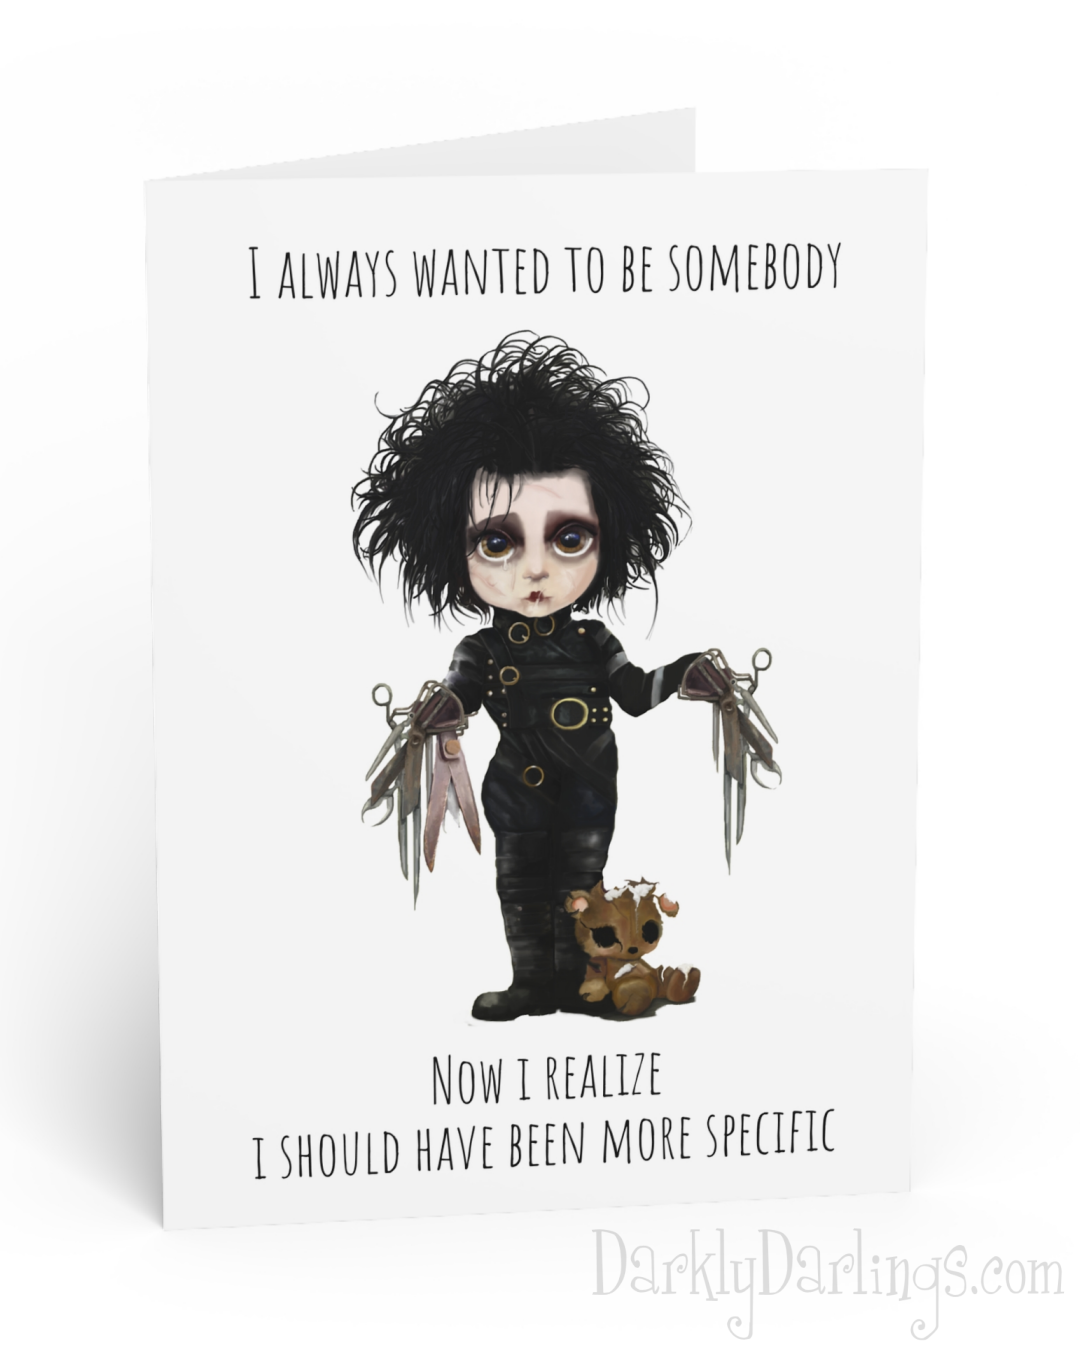 Edward Scissorhands greeting card "I always wanted to be somebody... Now I realize I should have been more specific"